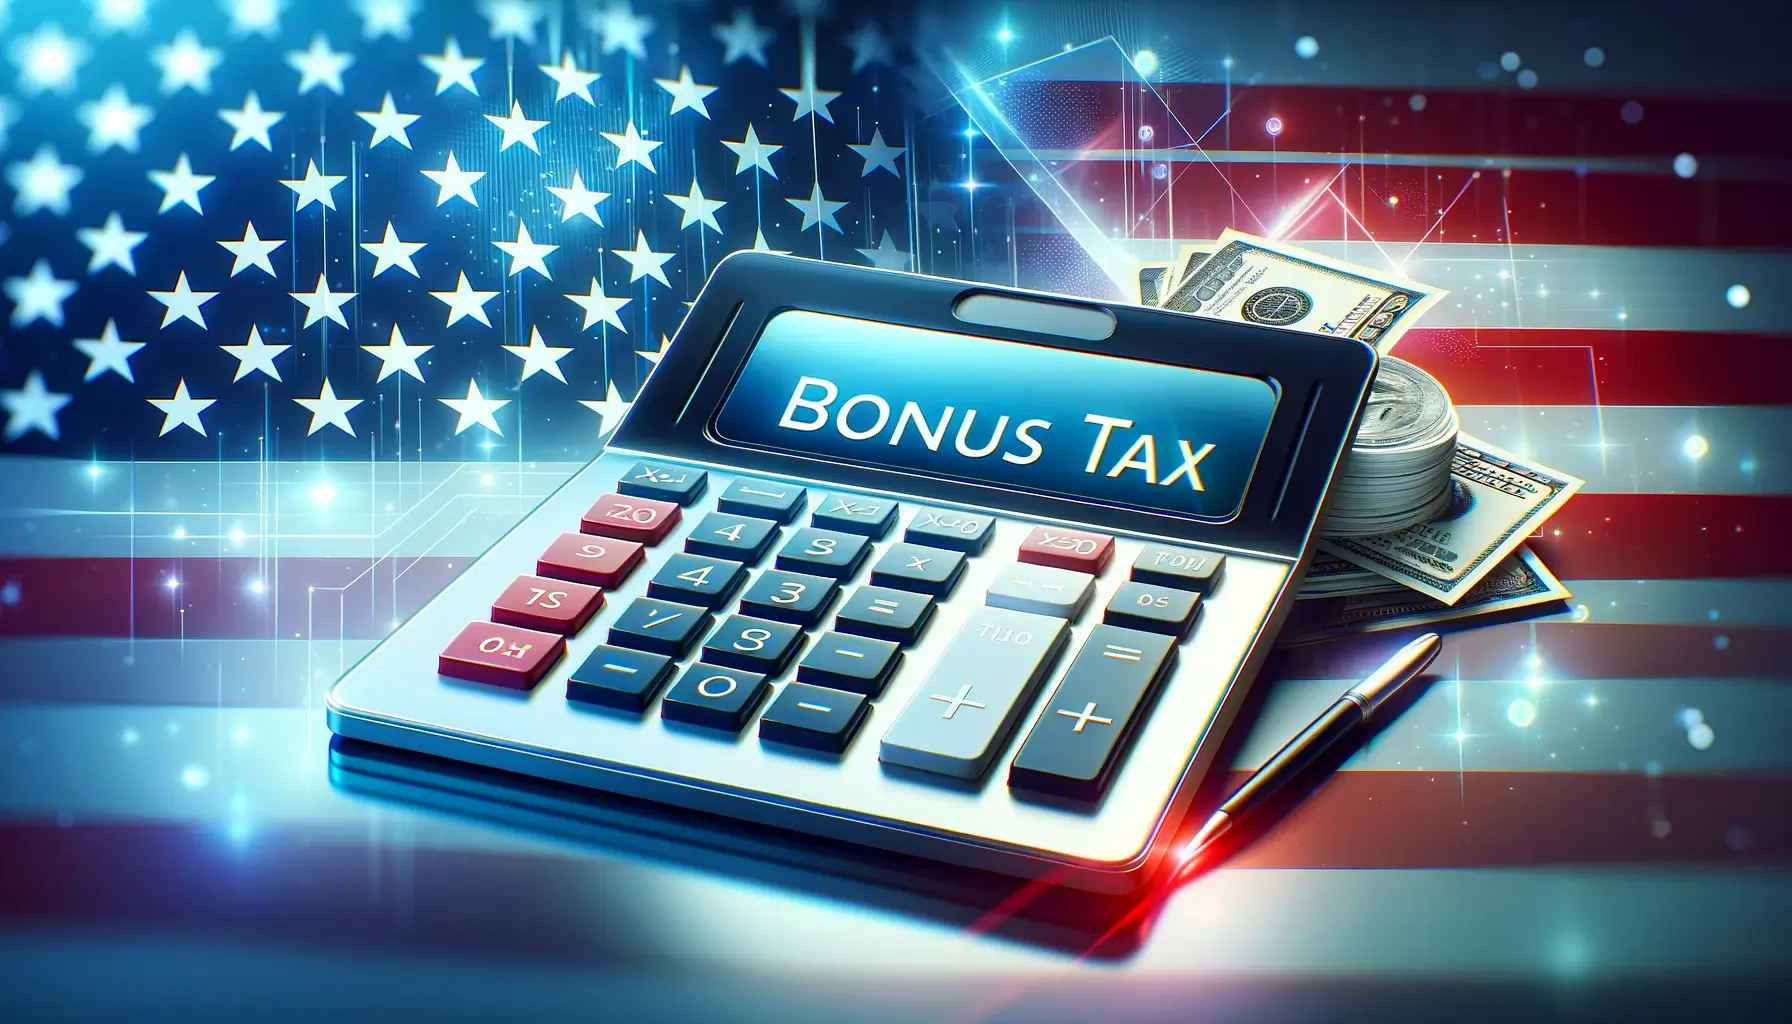 professional-modern-featured-image-for-an-article-about-a-bonus-tax-calculator-in-the-US.-The-image-includes-a-sleek-digital-calculator